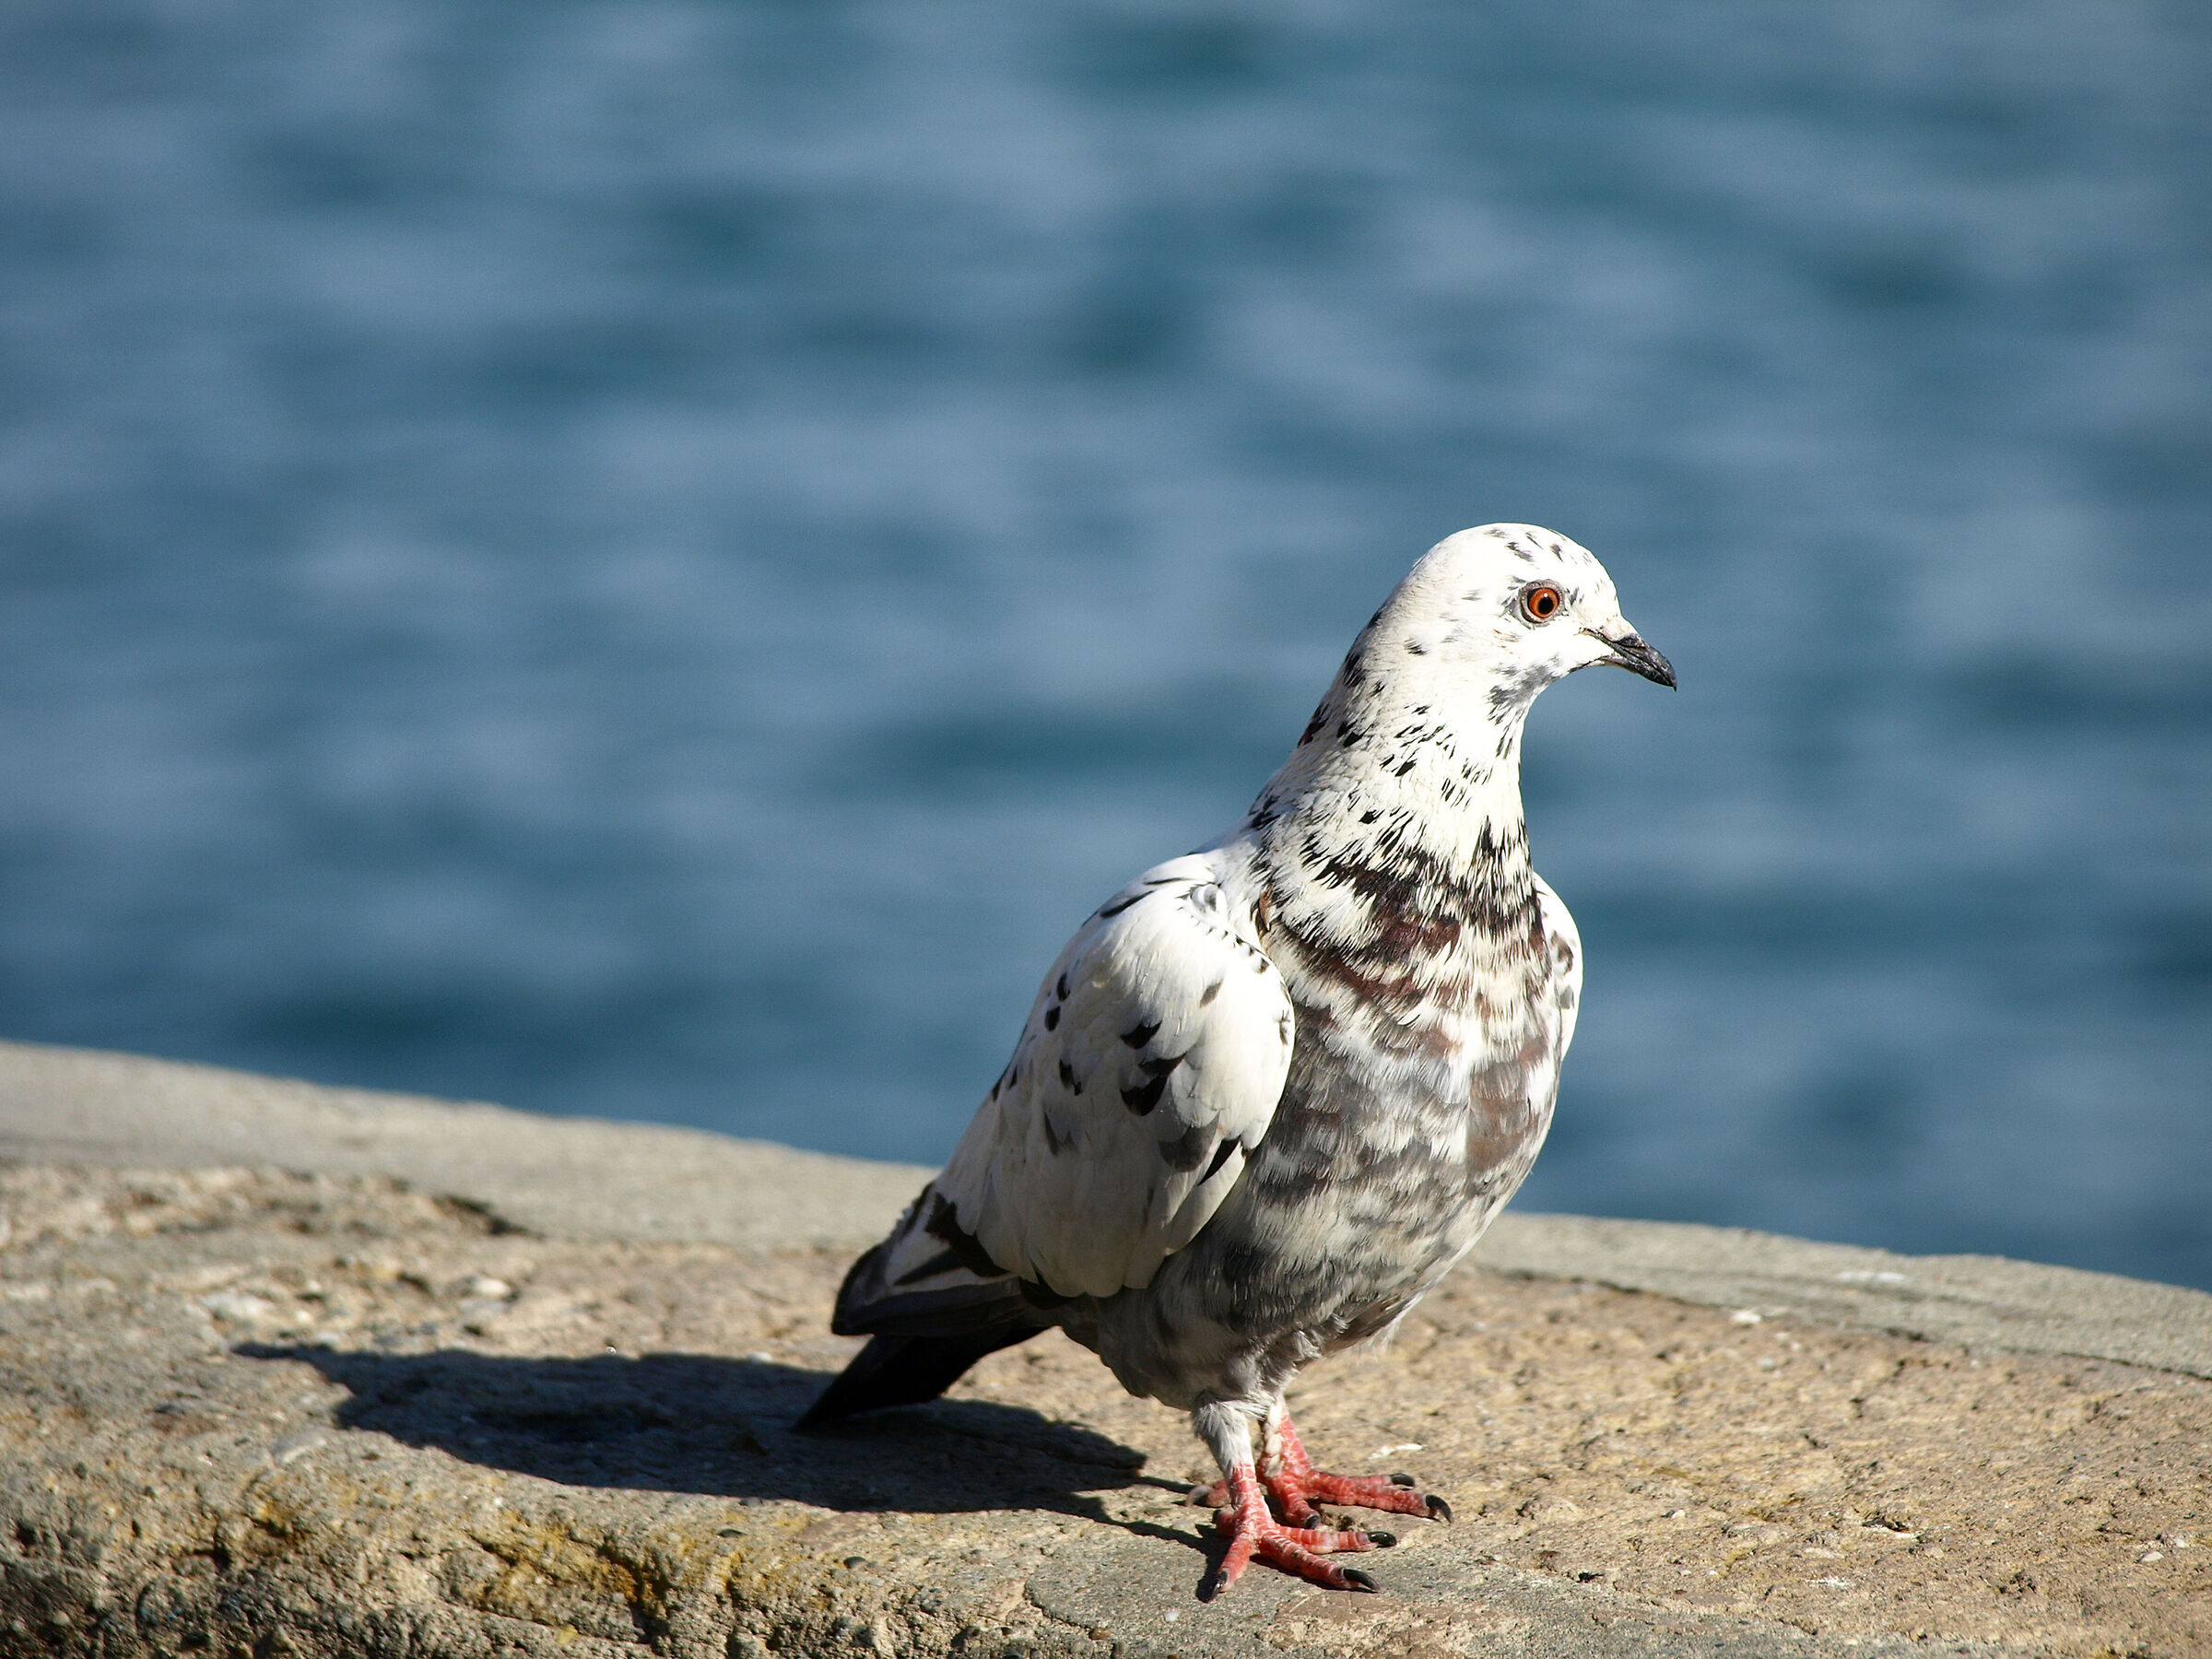 A simple pigeon...